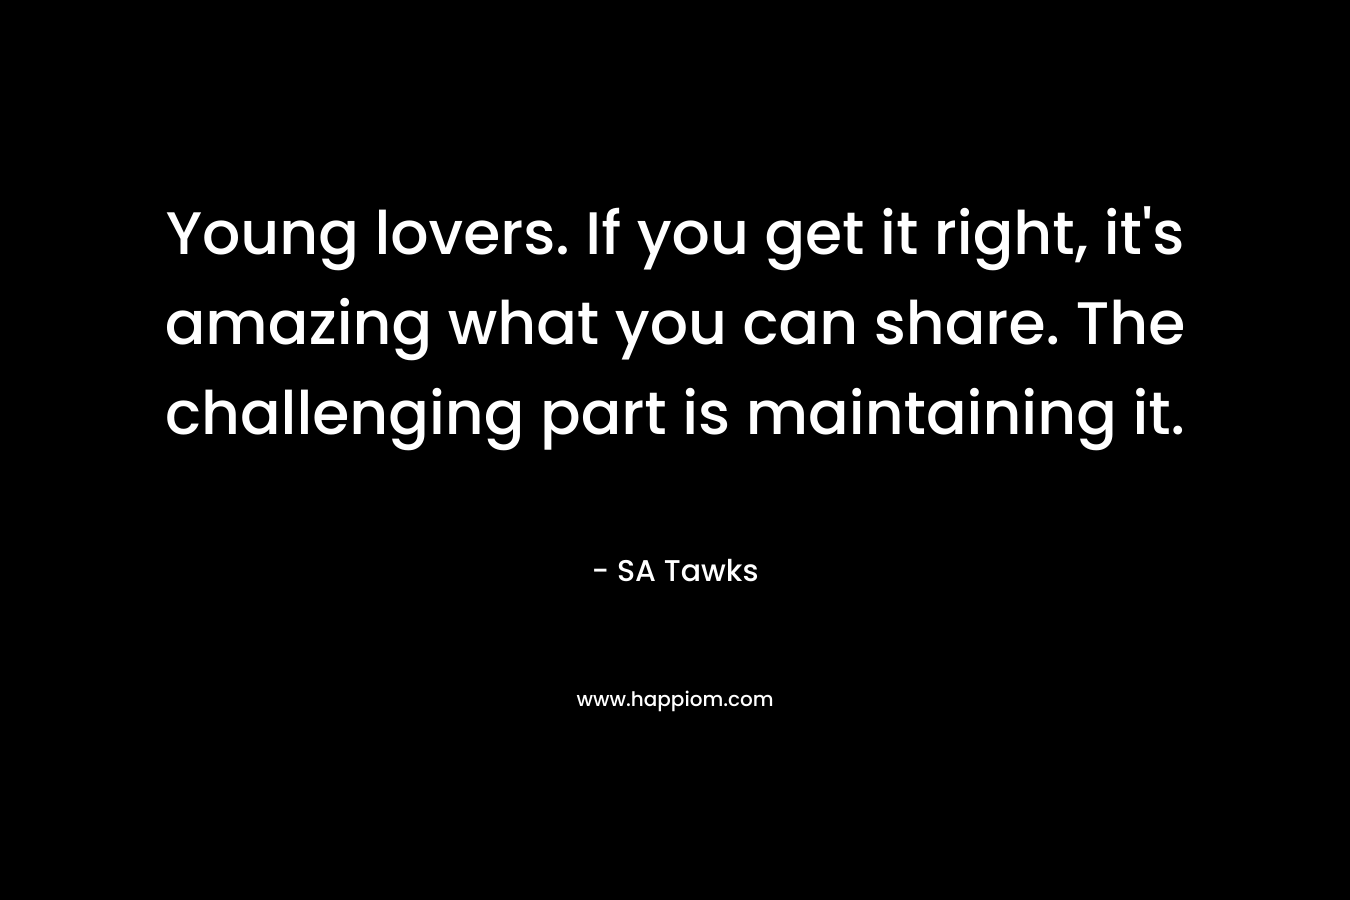 Young lovers. If you get it right, it’s amazing what you can share. The challenging part is maintaining it. – SA Tawks